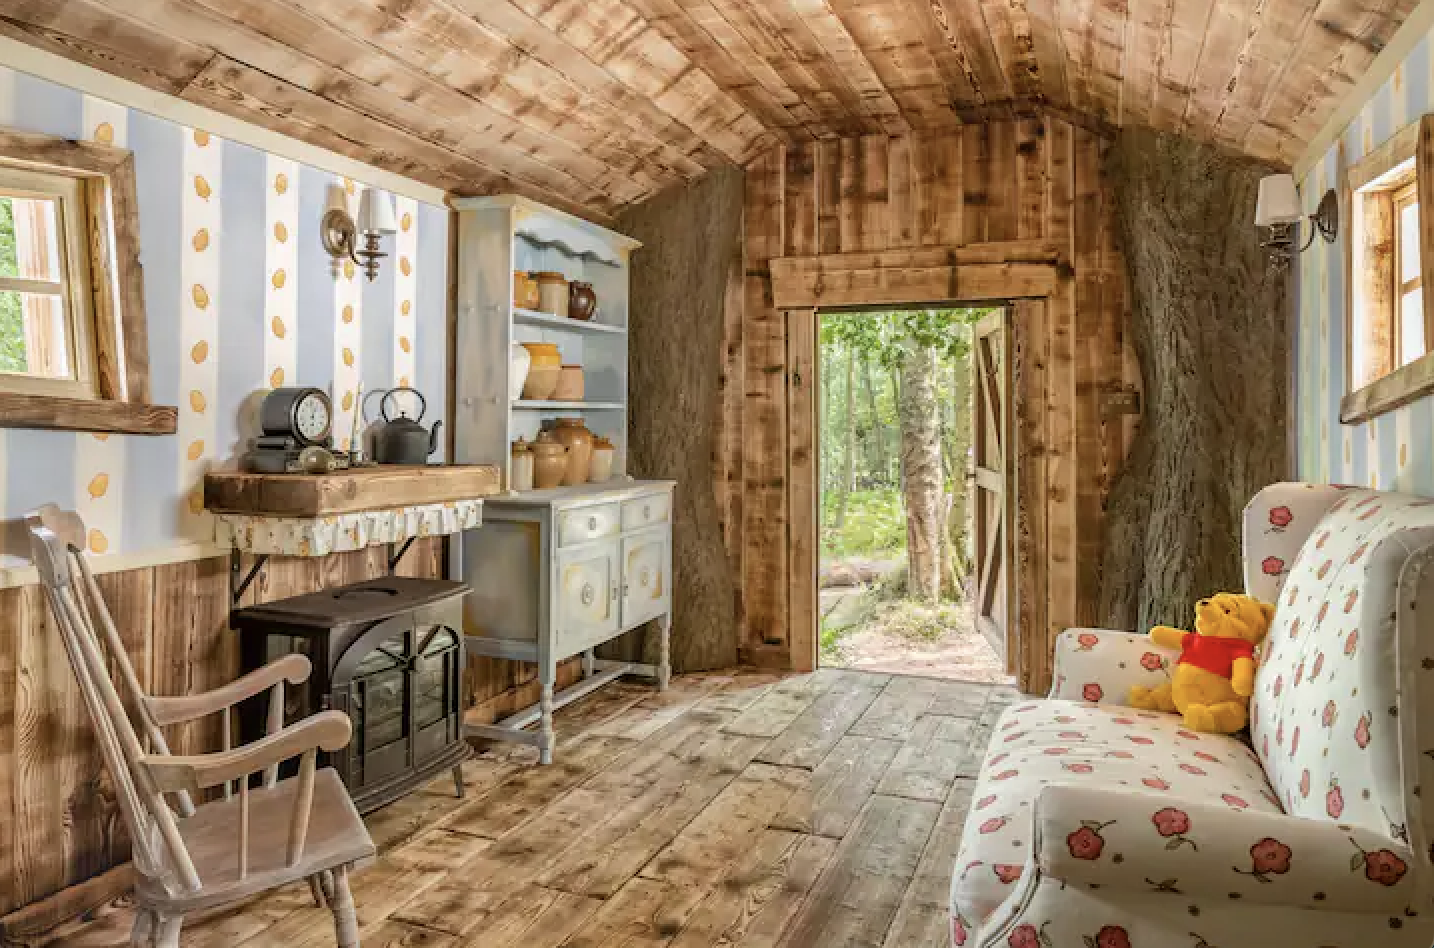 Airbnb Guests Can Stay in Disney's UK 'Winnie the Pooh' Treehouse